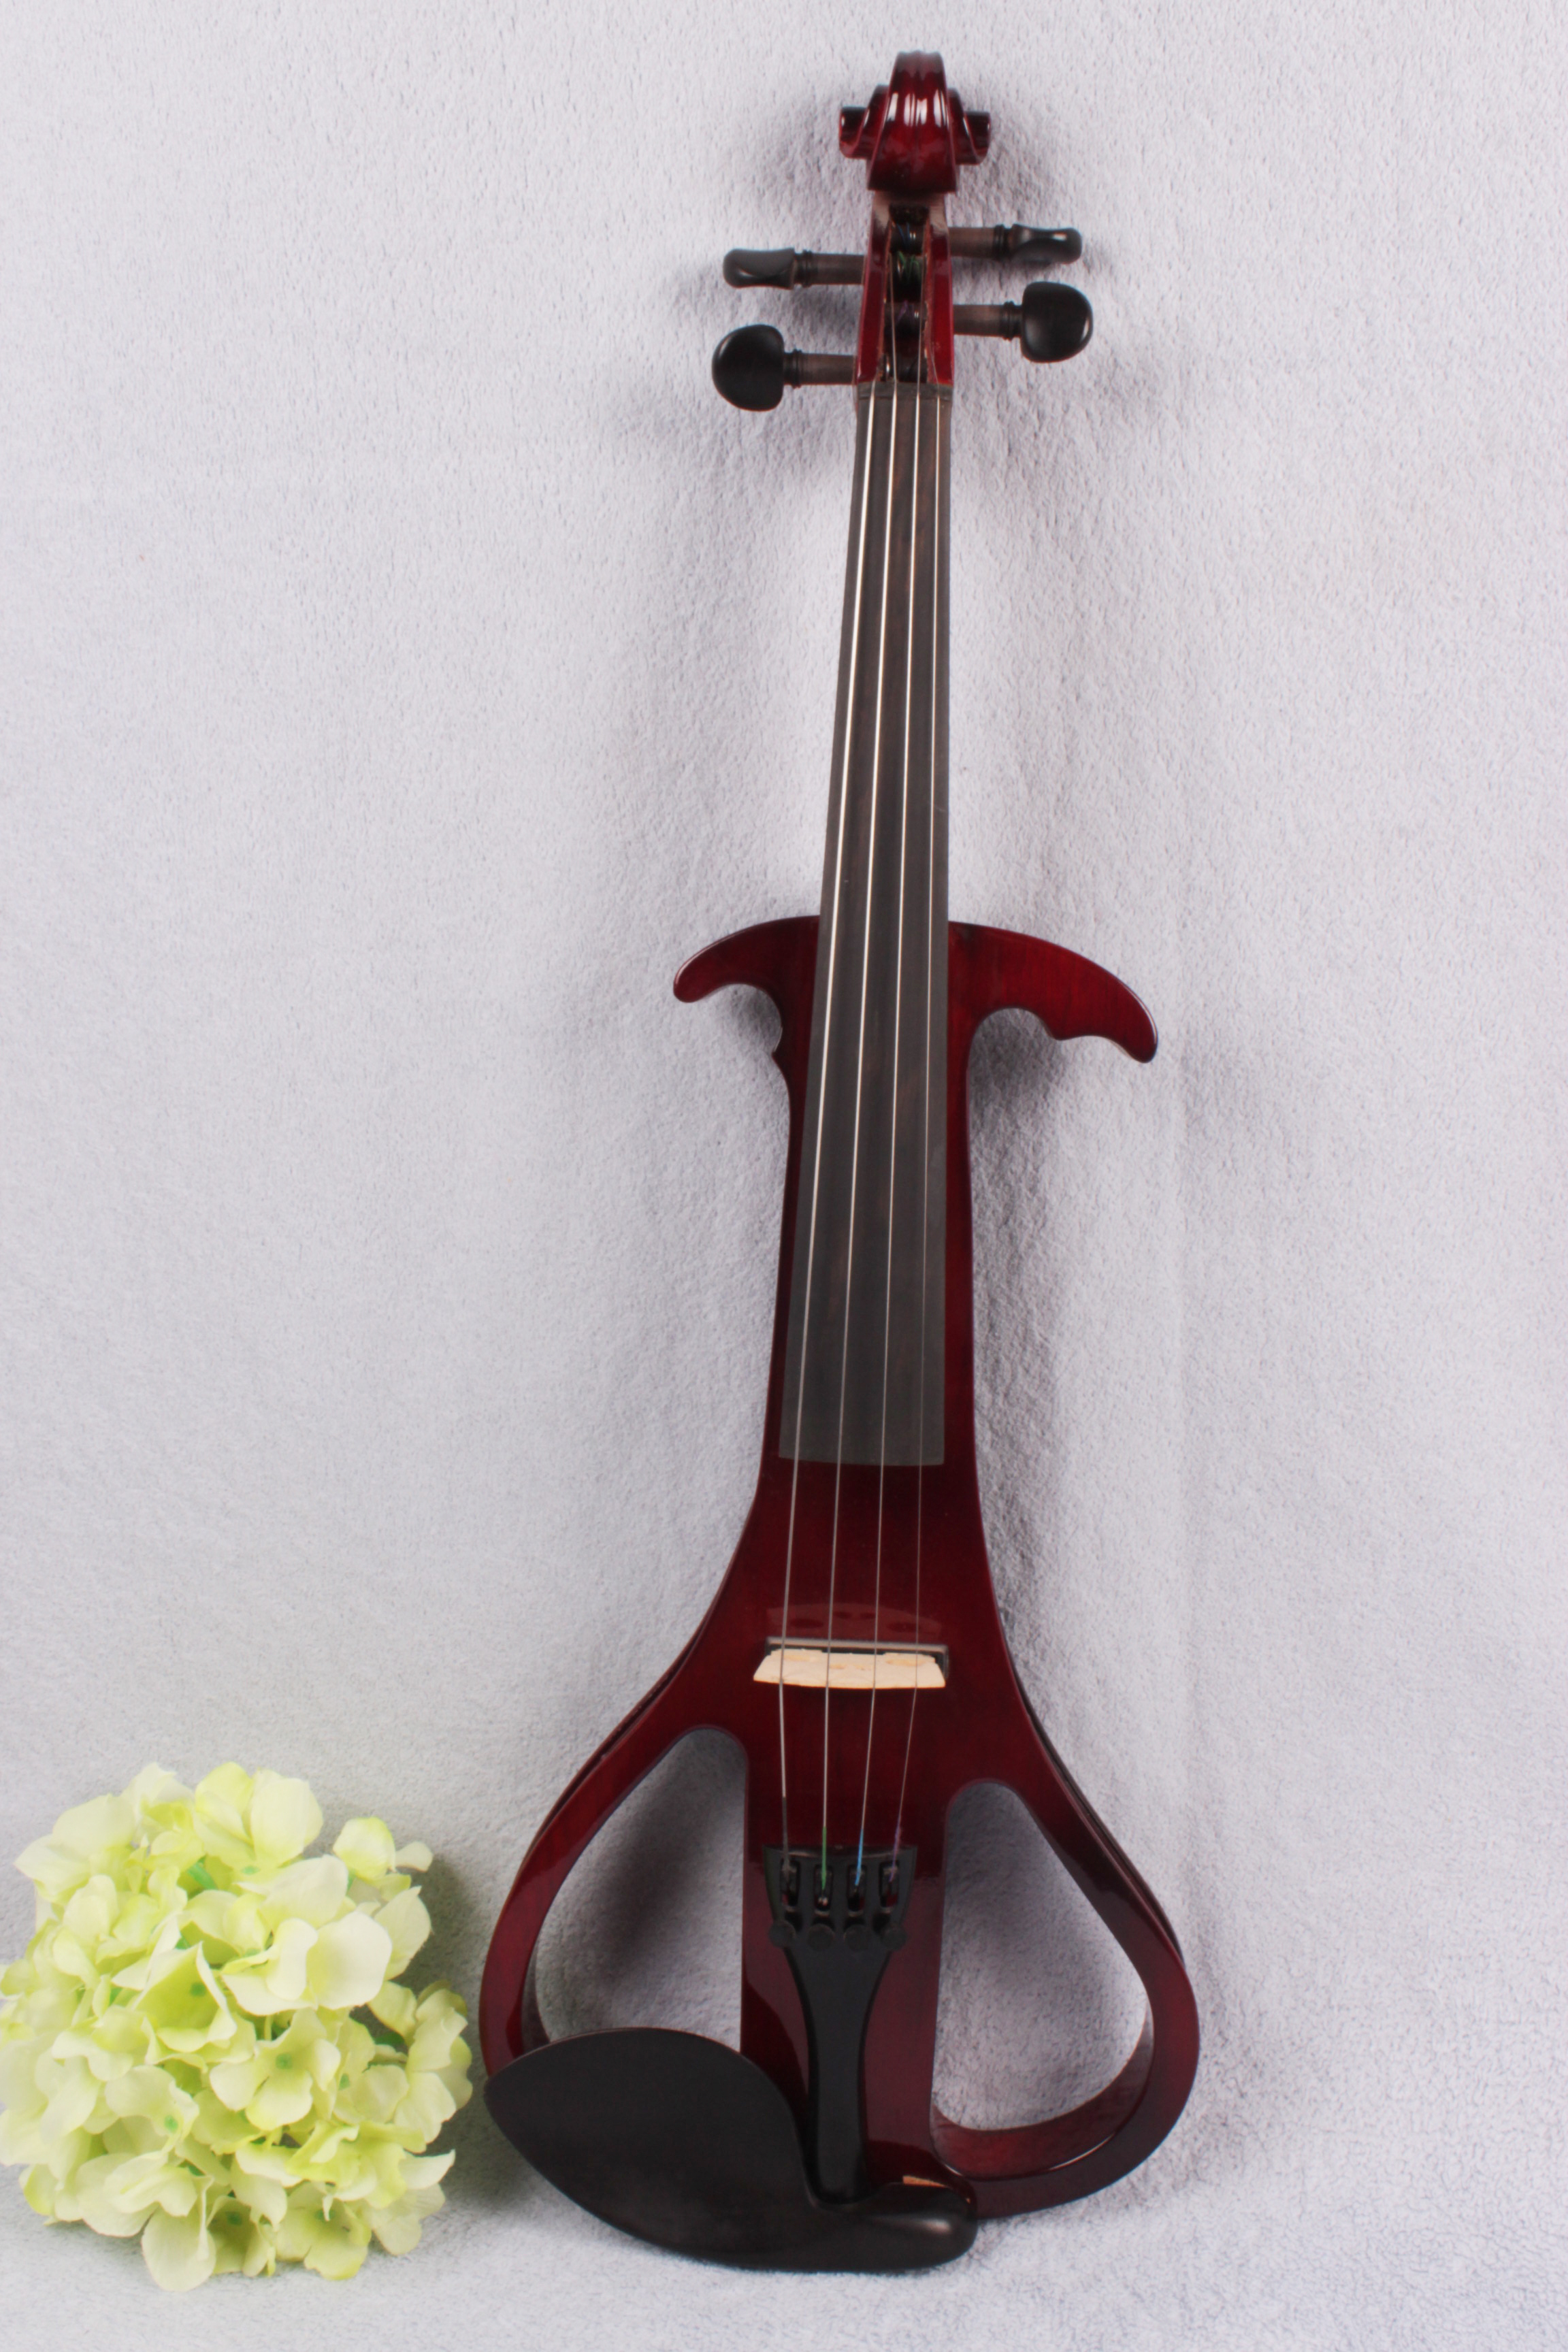 Yinfent 5Strings 4/4 Electric Silent Violin Natural wood Free Case Bow Cable#EV5 